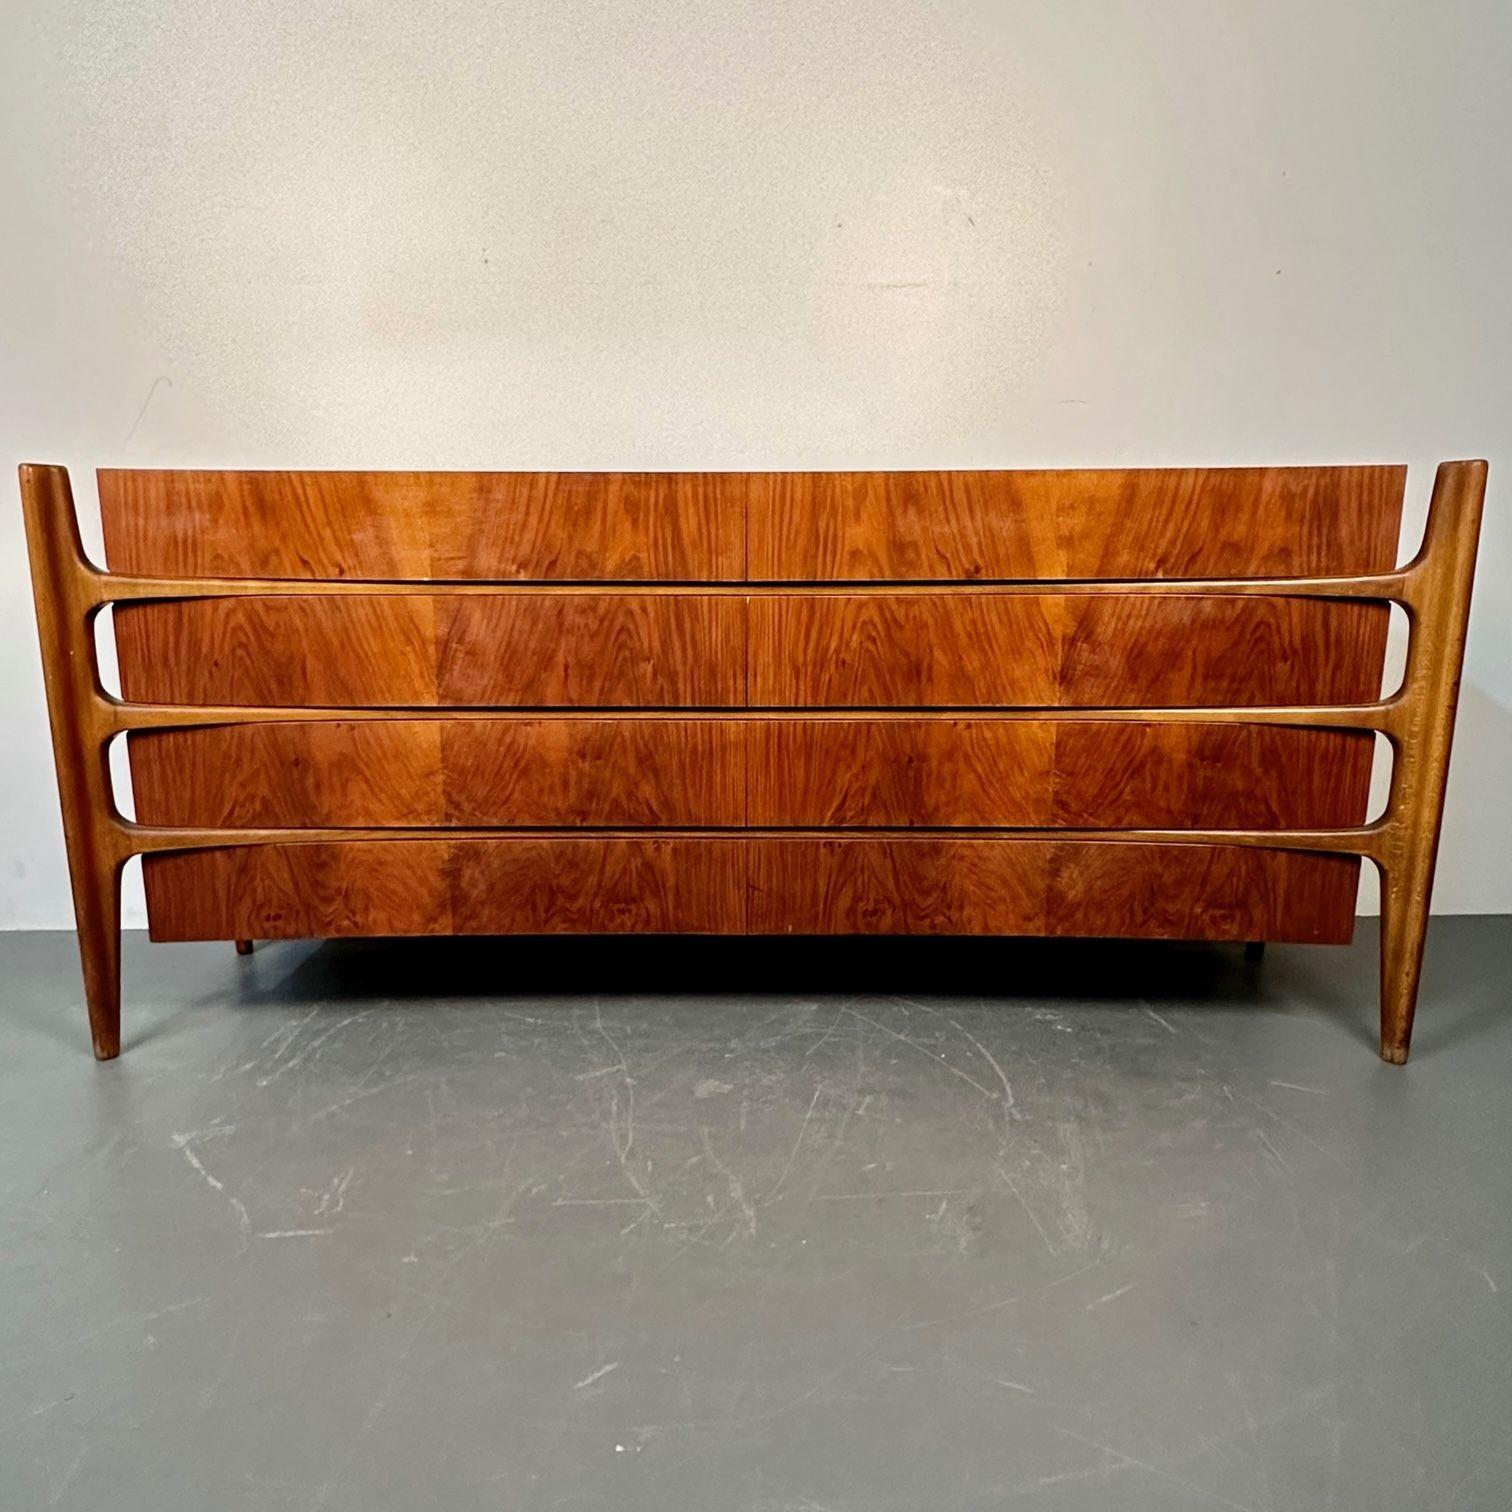 William Hinn, Swedish Mid-Century Modern, Exoskeleton Curved Dresser, 1960s In Good Condition For Sale In Stamford, CT